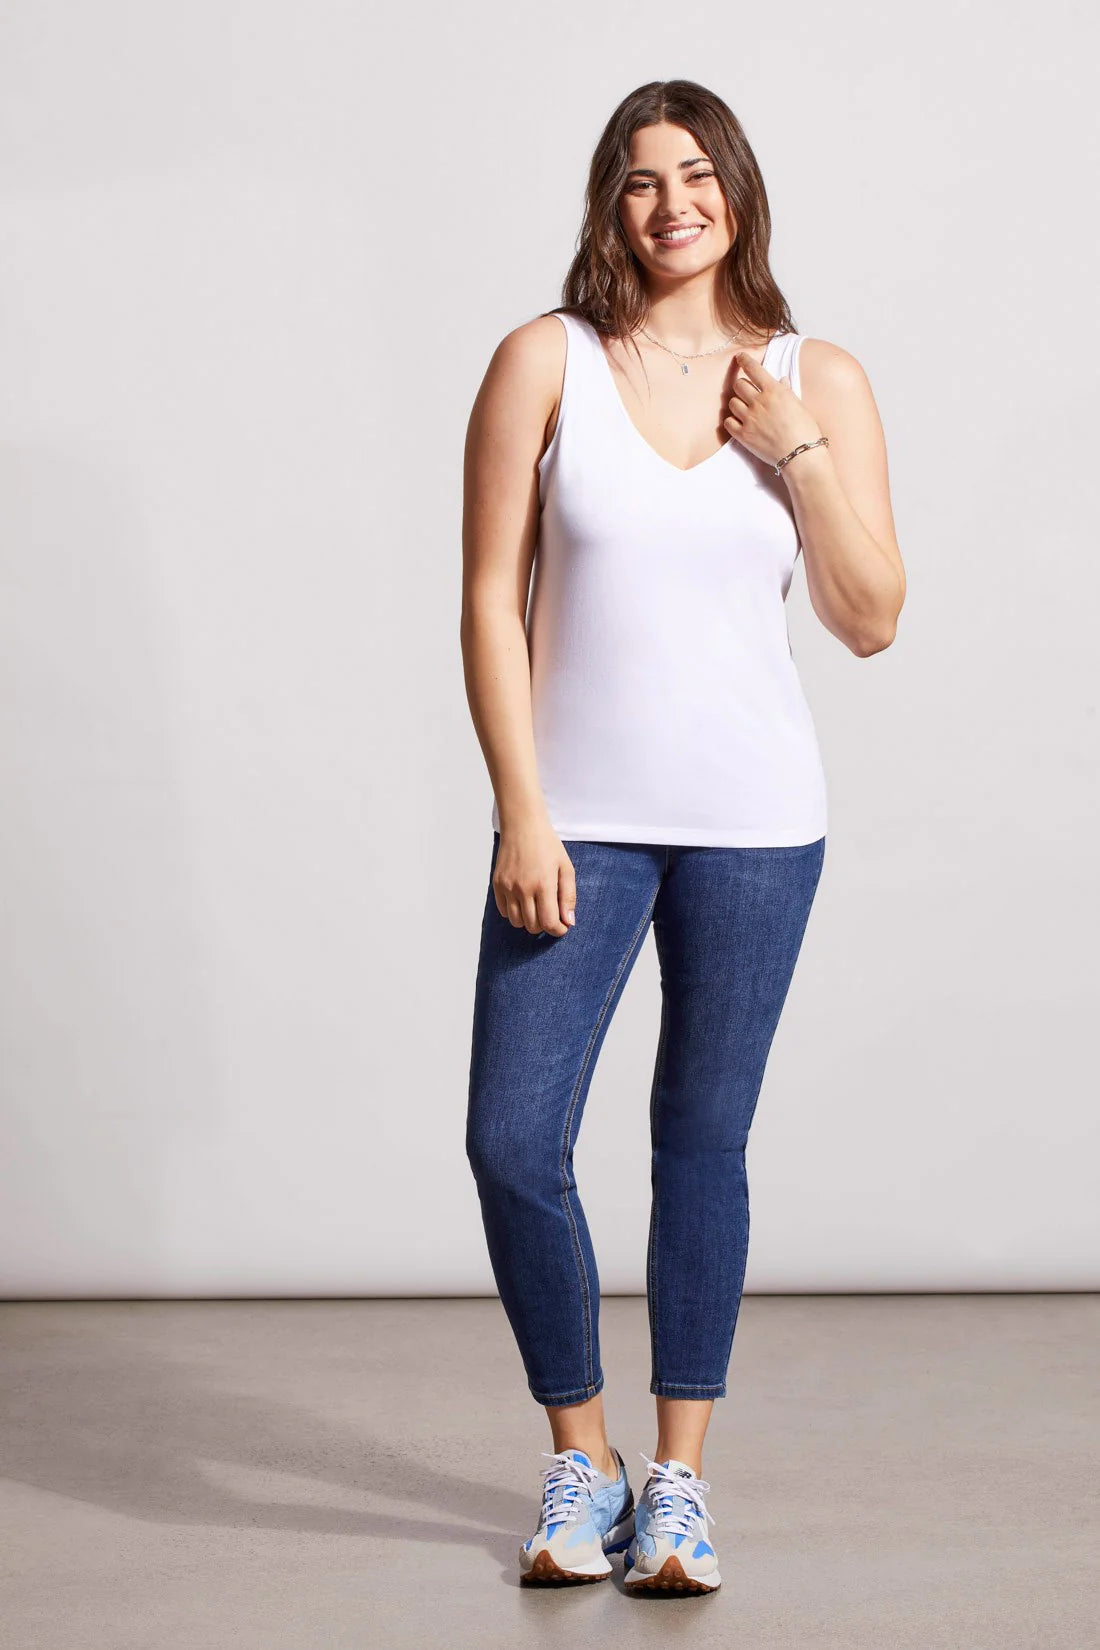 Say hello to the ultimate layering piece. This cami is a wardrobe essential with a versatile design that lets you wear it two ways.